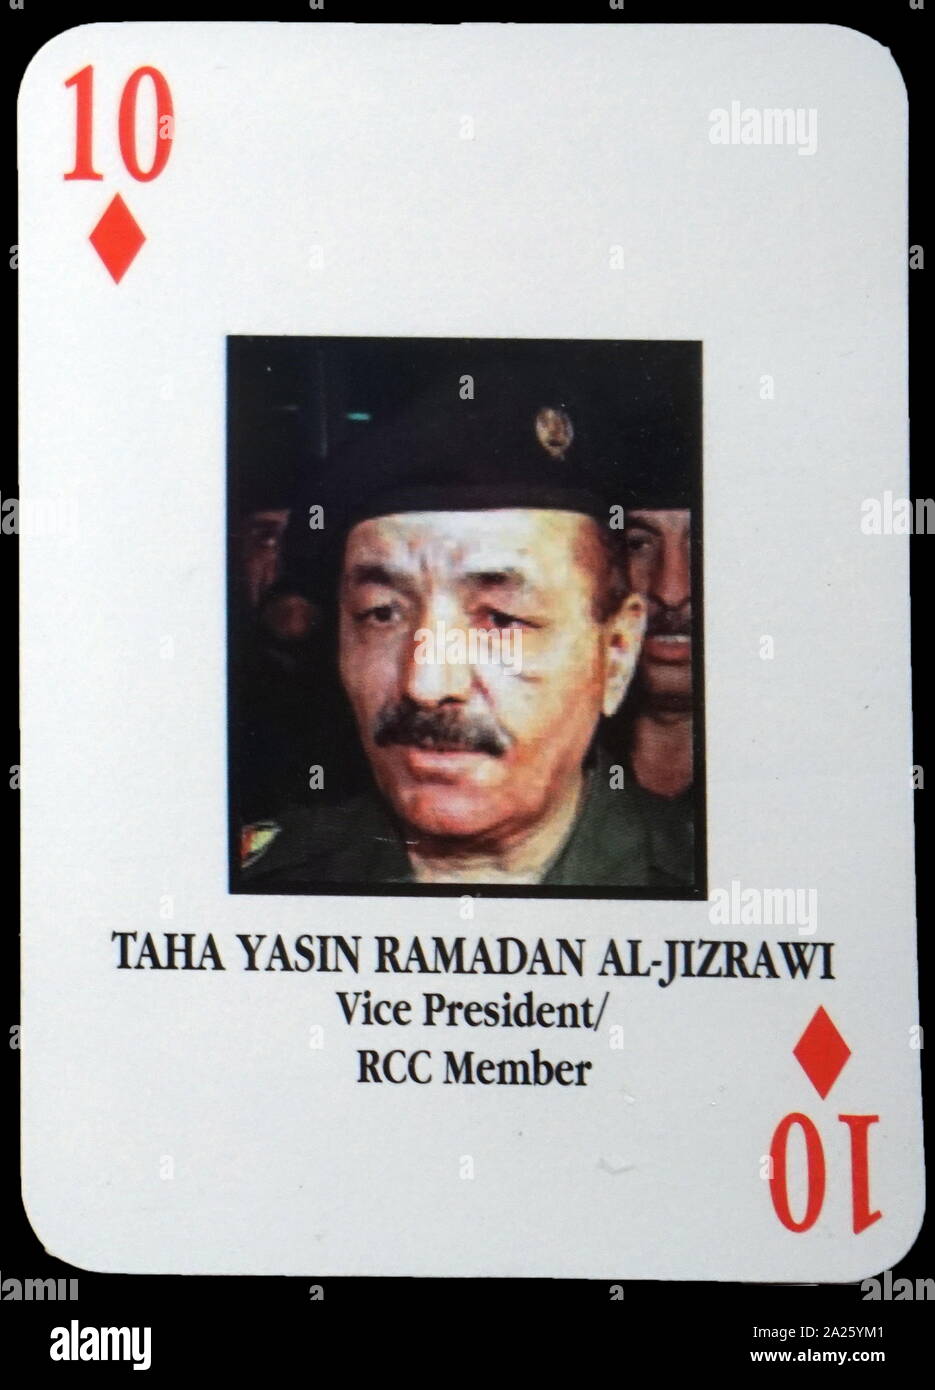 Most-wanted Iraqi playing cards - Taha Yasin Ramadan Al-Jizrawi (Vice President/ RCC Member). The U.S. military developed a set of playing cards to help troop identify the most-wanted members of President Saddam Hussein's government during the 2003 invasion of Iraq. Stock Photo